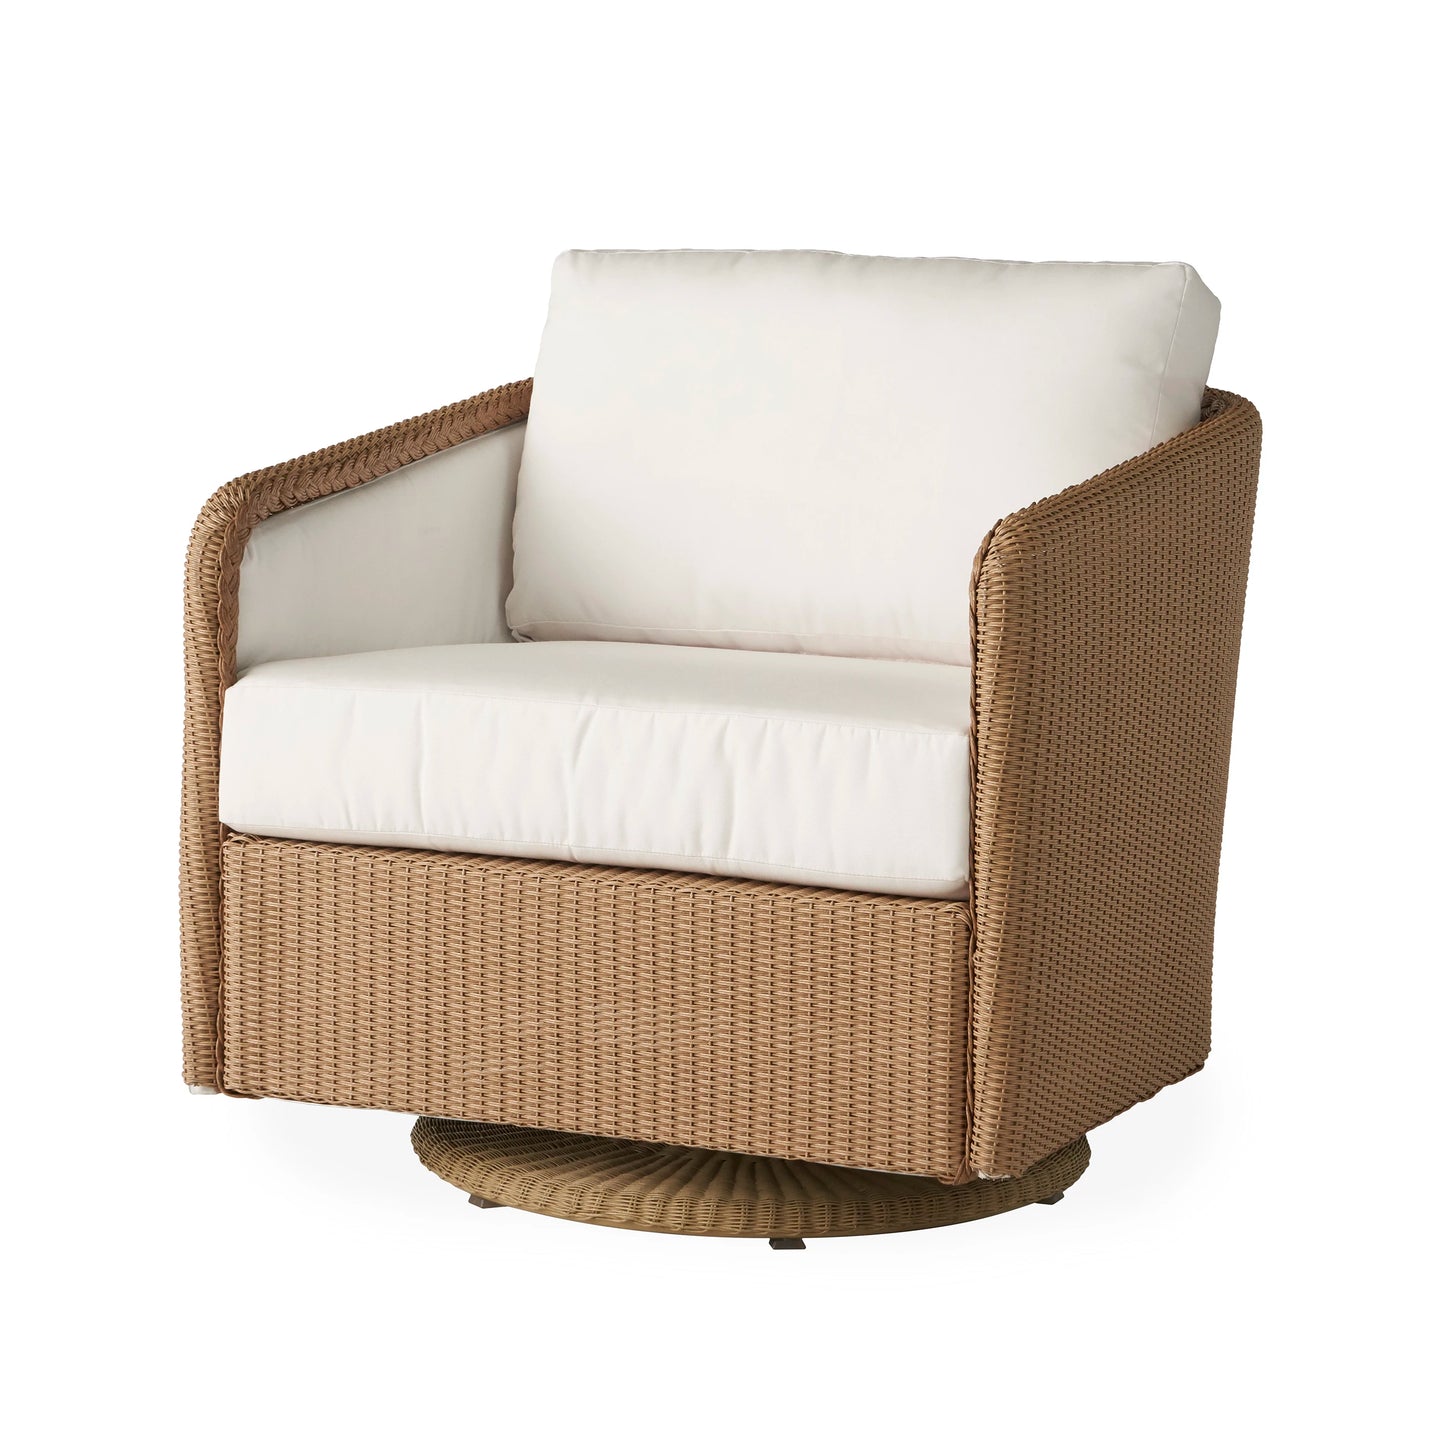 Visions Swivel Glider Lounge Chair